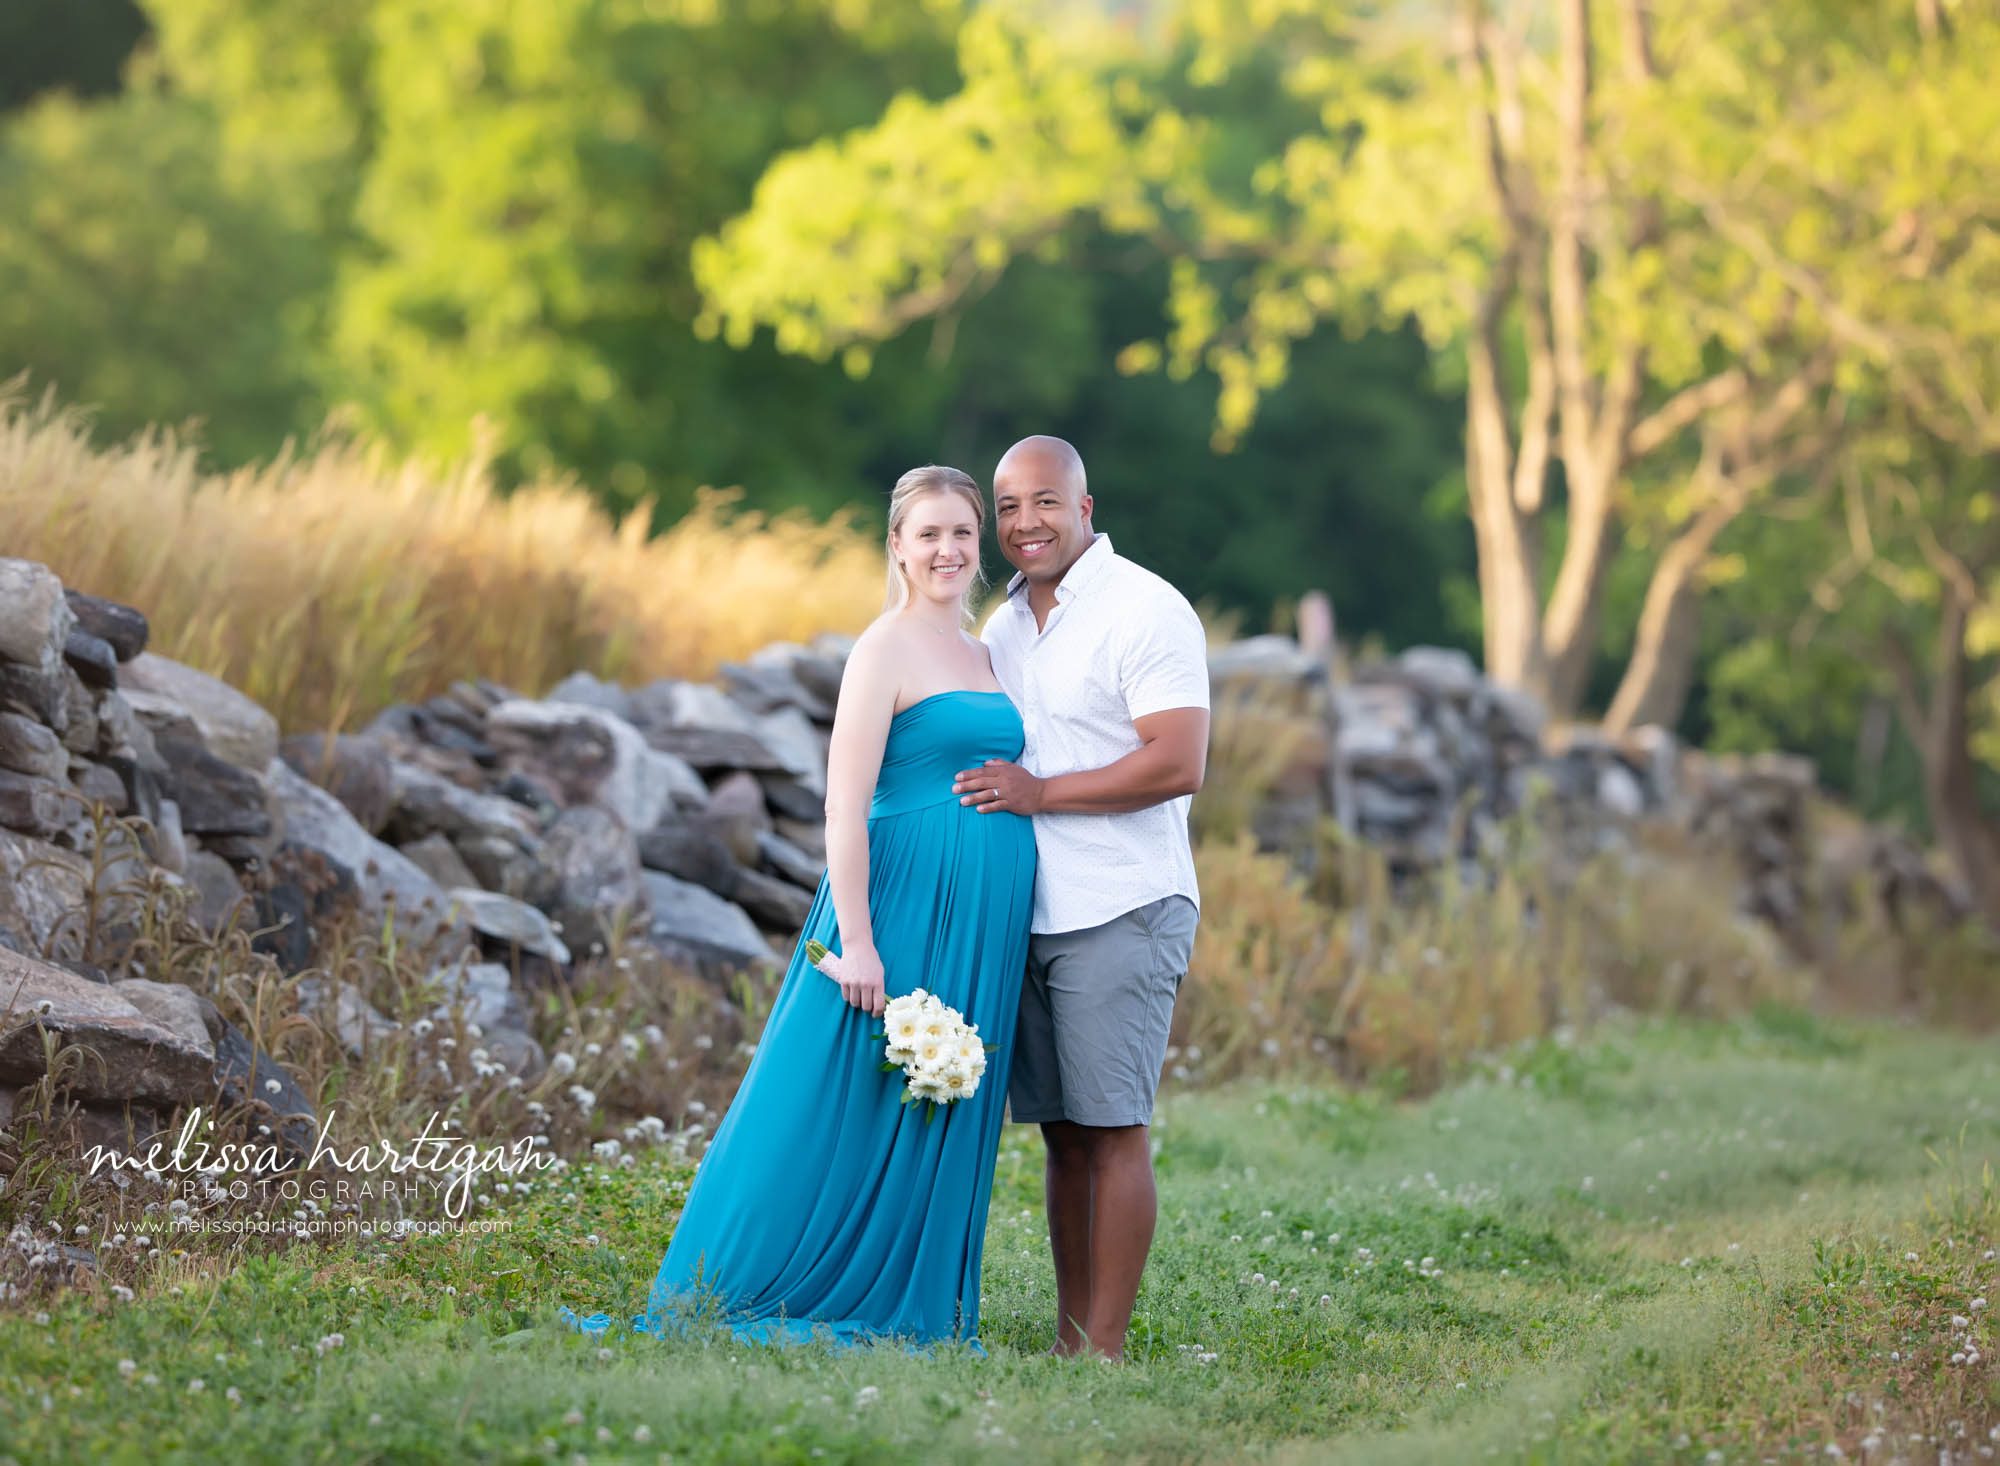 pregnant momwearing bright turquoise maternity dress dad holding moms baby bump mom holding bouquet of flowers Manchester Maternity Photographer